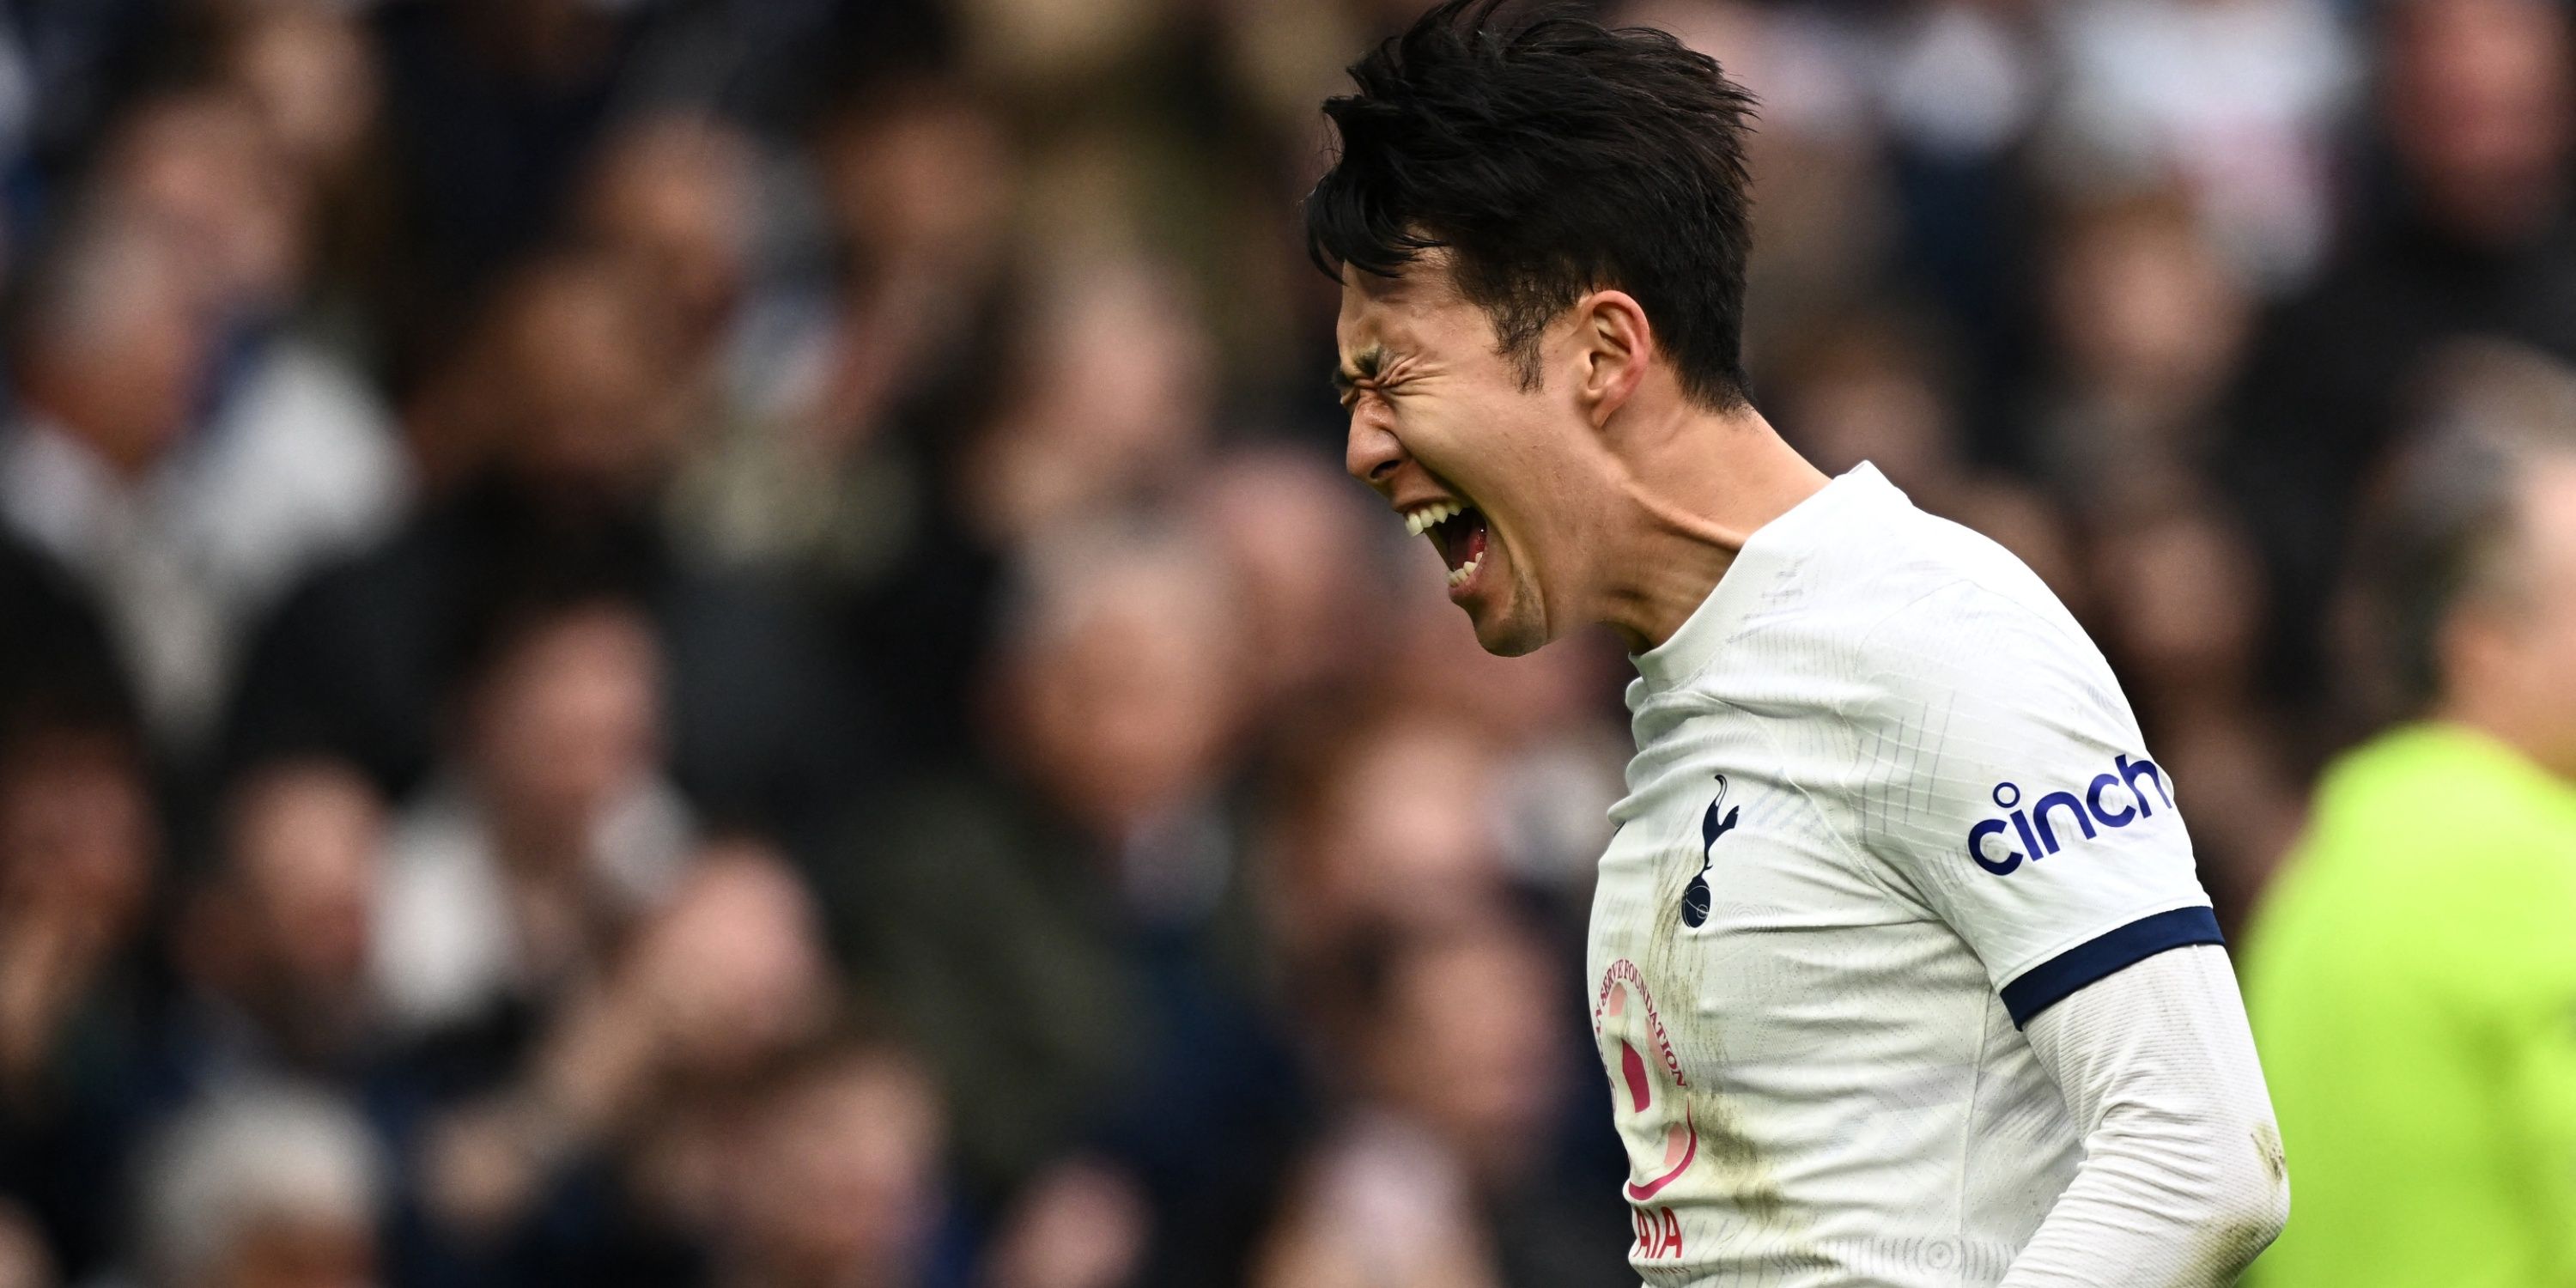 Spurs “monster” is slowly becoming their best player over Son - FootballFanCast.com